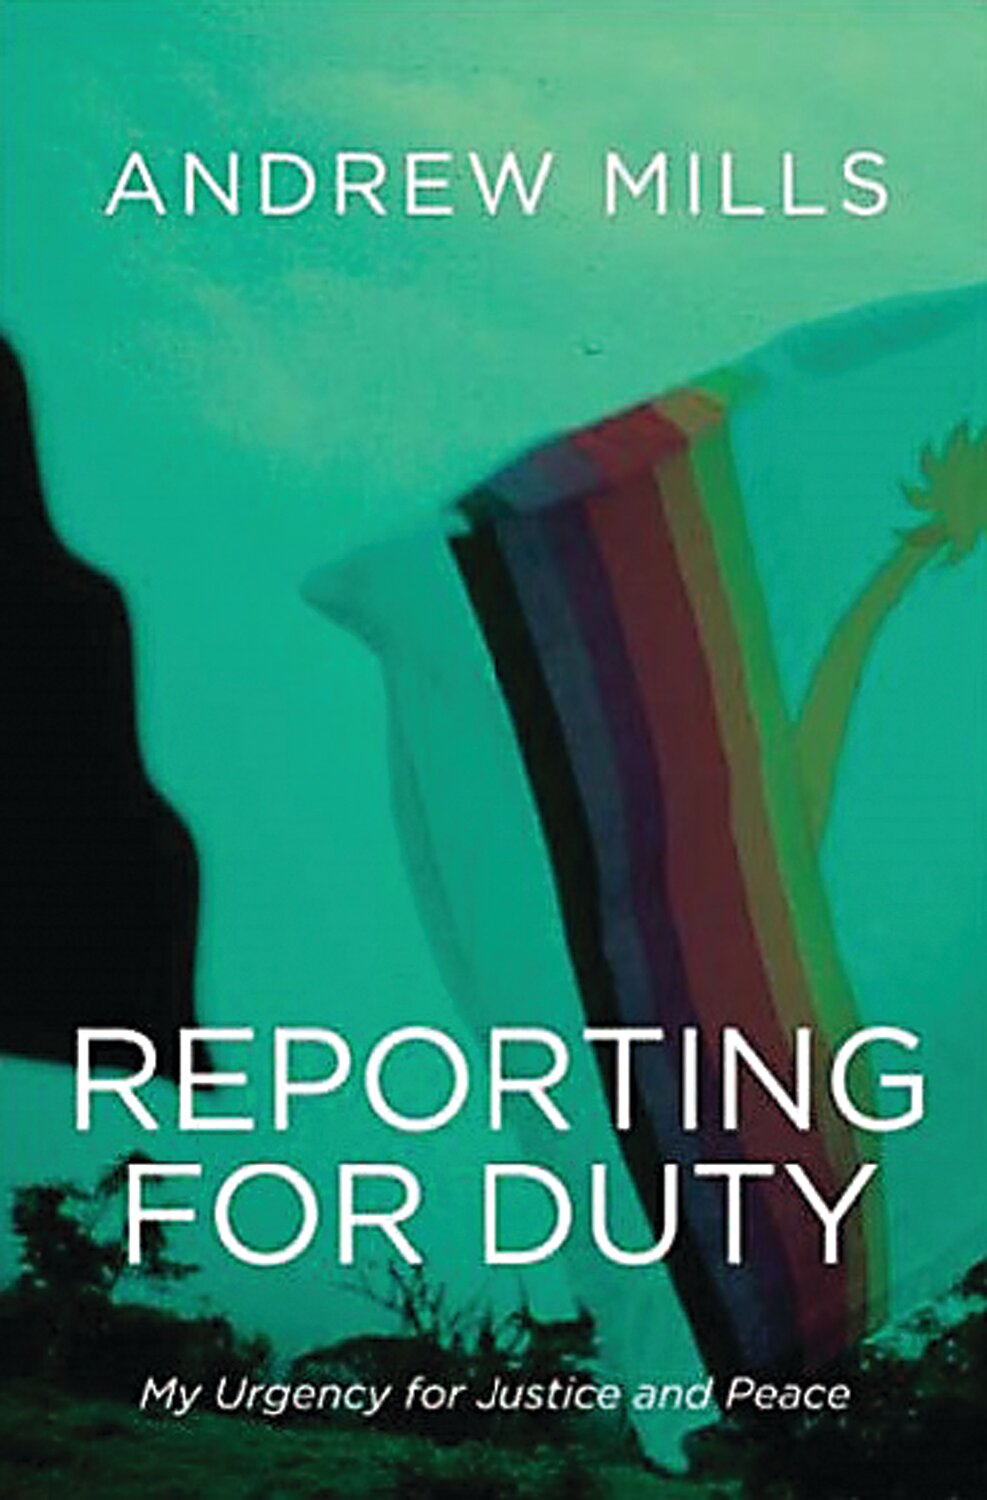 “Reporting for Duty: My Urgency for Justice and Peace” is Lower Gwynedd resident Andrew Mills second book, published by Resource Publications. It focuses on his history of activism for nonviolence and equity.